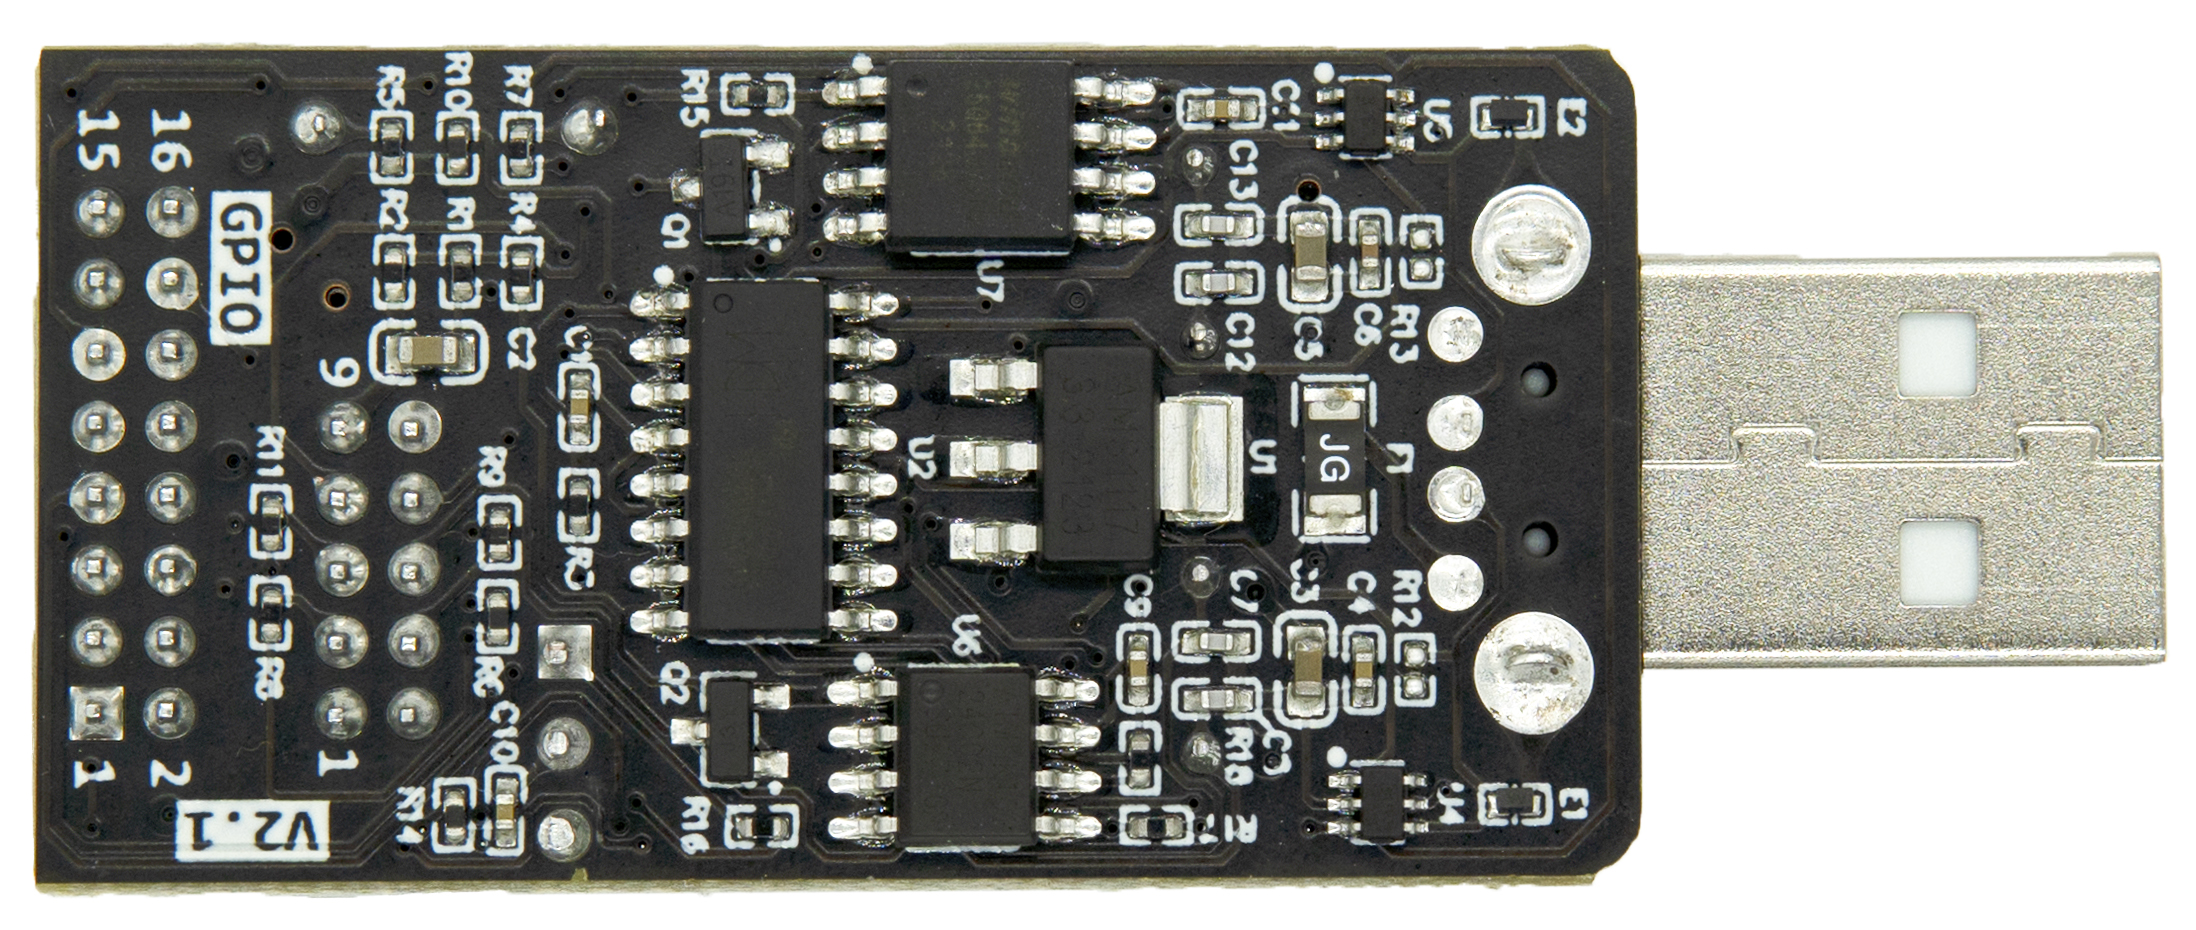 http://photos.100ask.net/100ask/products/boards/St/100ask_stm32f103/100ask_stm32f103_mini_back.jpg